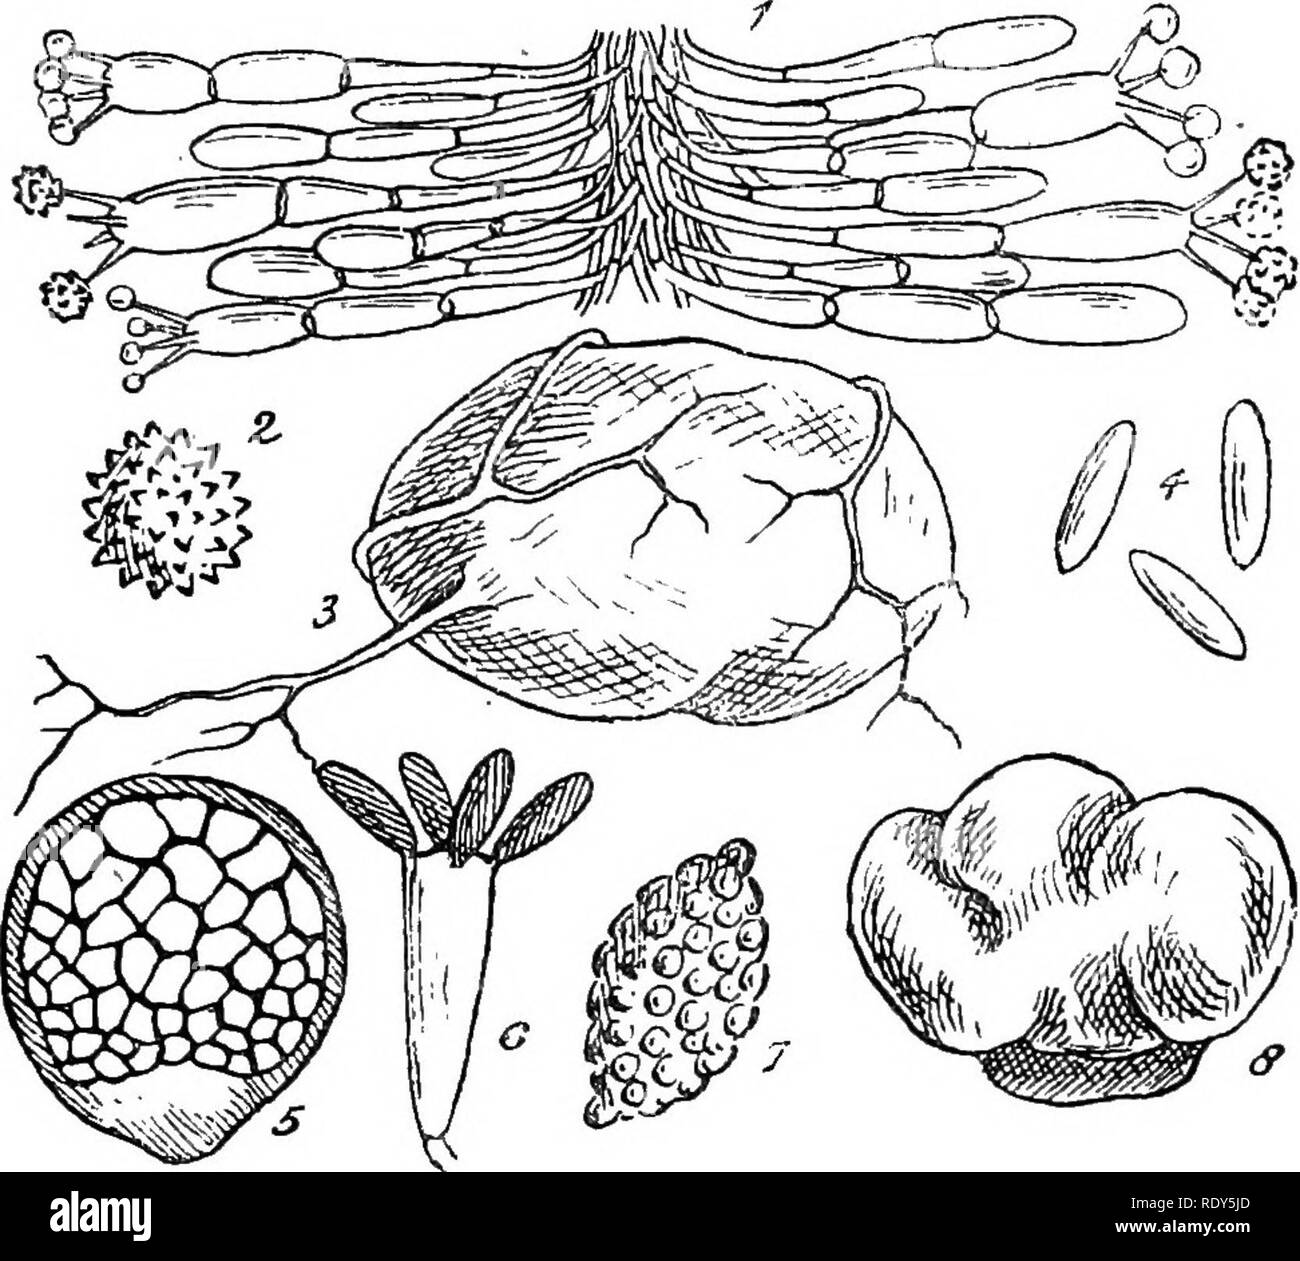 . British fungus-flora. A classified text-book of mycology. Fungi. GASTEOMYCETES. u. FIGURES ILLUSTEATING THE HYMENOGASTBEAE. Fig. 1, Octaviania asterosperma, portion of a tramal plate showing the hyphae of the trama bending outwards and bearing the basidia on both surfaces; the young spores are smooth ; highly mag.;—Fig. 2, Hydnangium carneum, spore very highly mag.;—Fig. 3, BMzopngon ruhescens, plant nat. size;—Fig. 4, Hysterangium nephriticam, spores higlily mag.;—Fig. 5, Hymenogaster tener, section through centre of plant, showing the con- tinuous peridium -with the thickened sterile base, Stock Photo